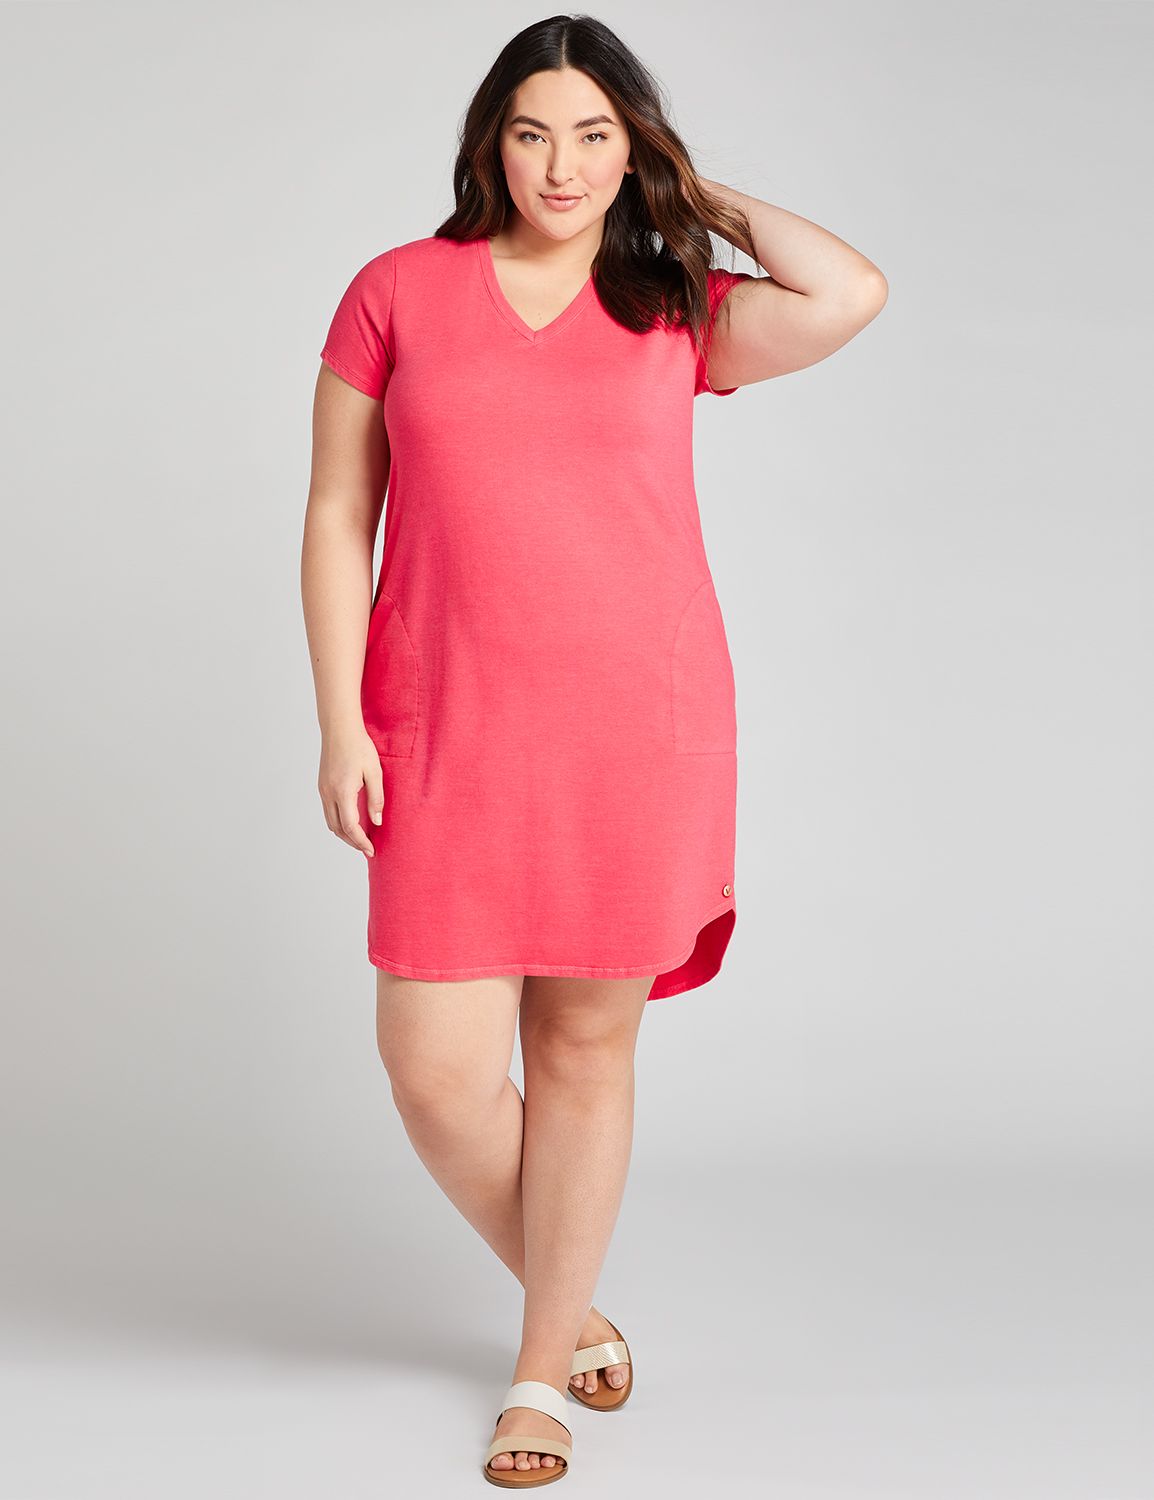 clearance plus size activewear